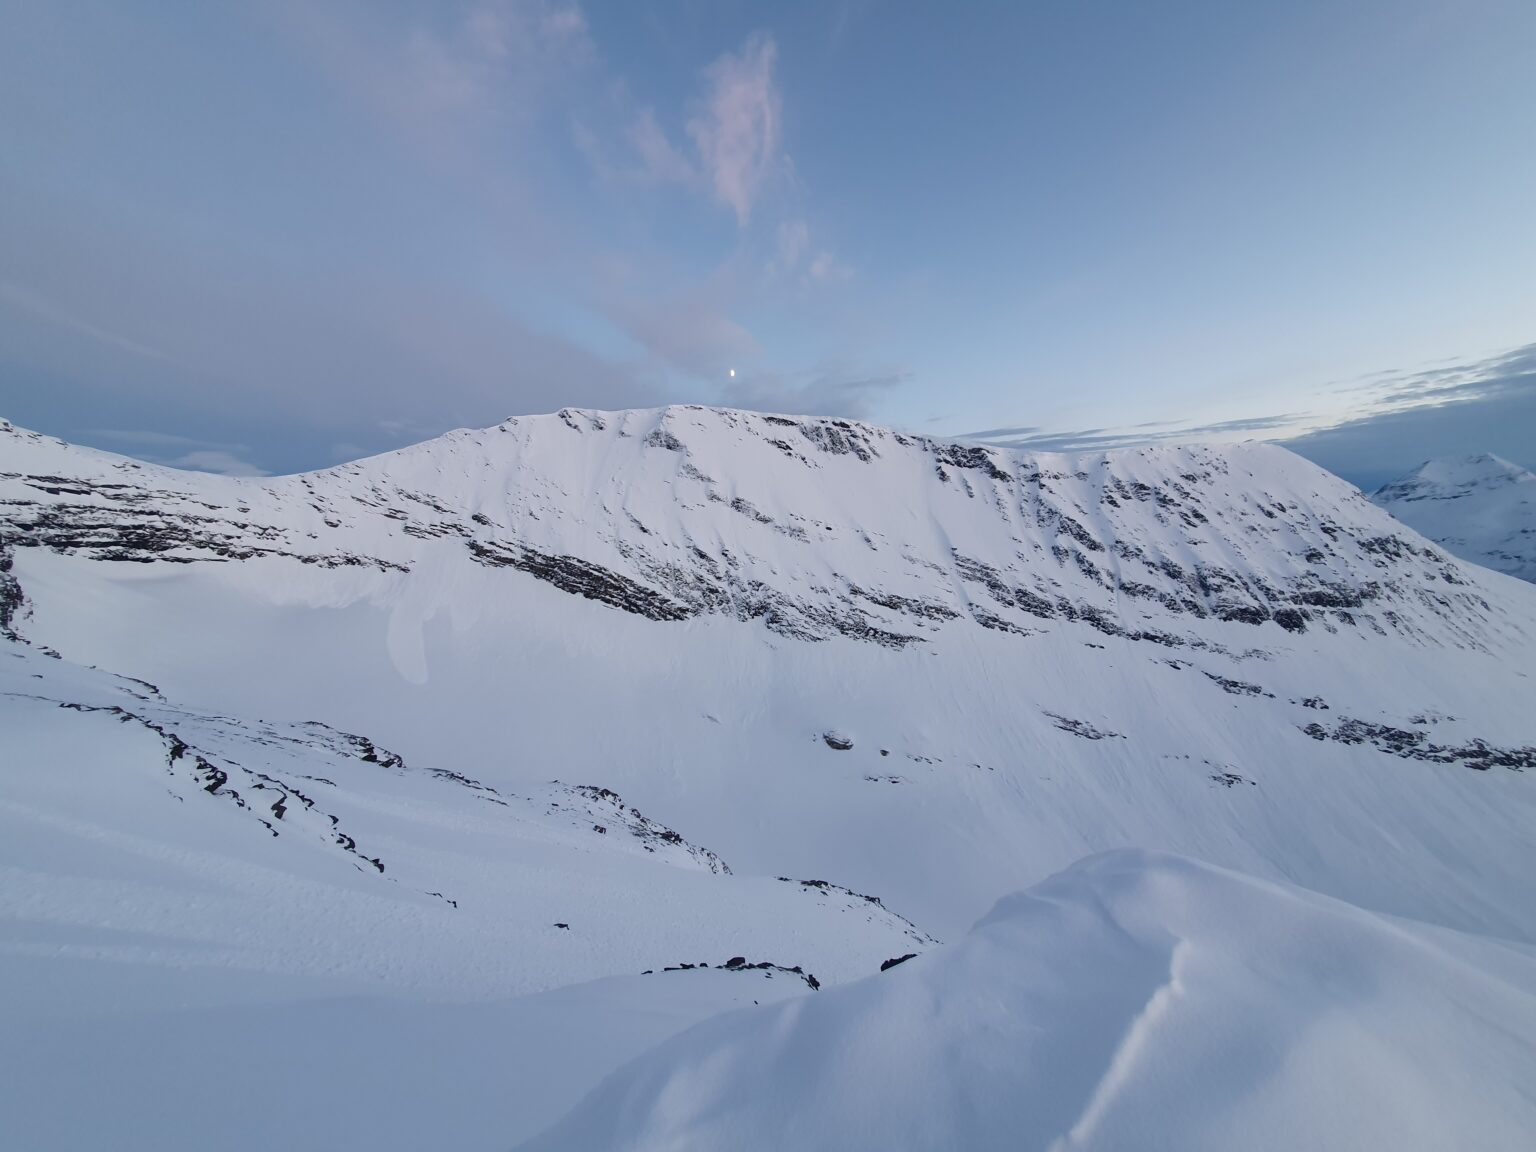 A closer look at the Southeast Ridge from Nerotinden